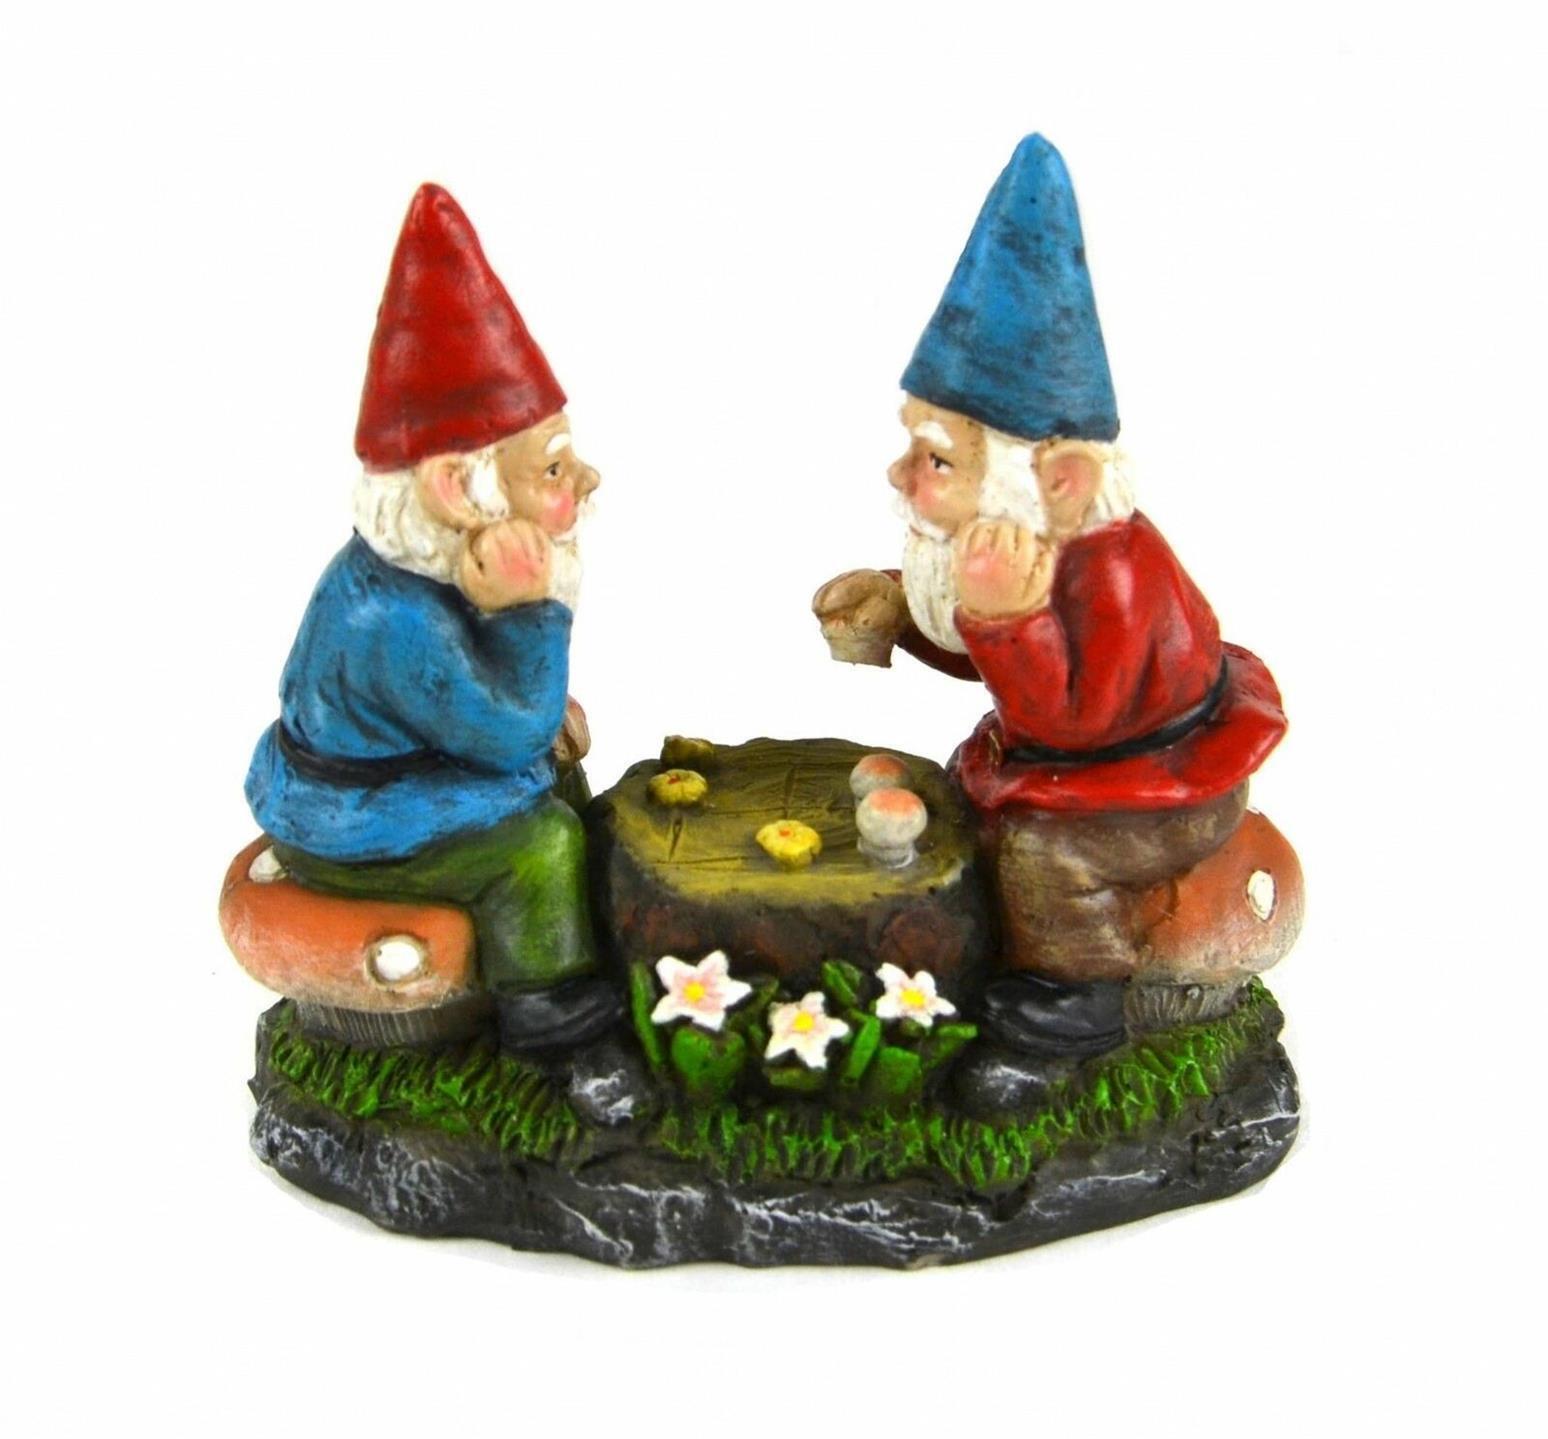 Miniature Fairy Gnome Garden Gnomes Playing Chess - Buy 3 Save $5